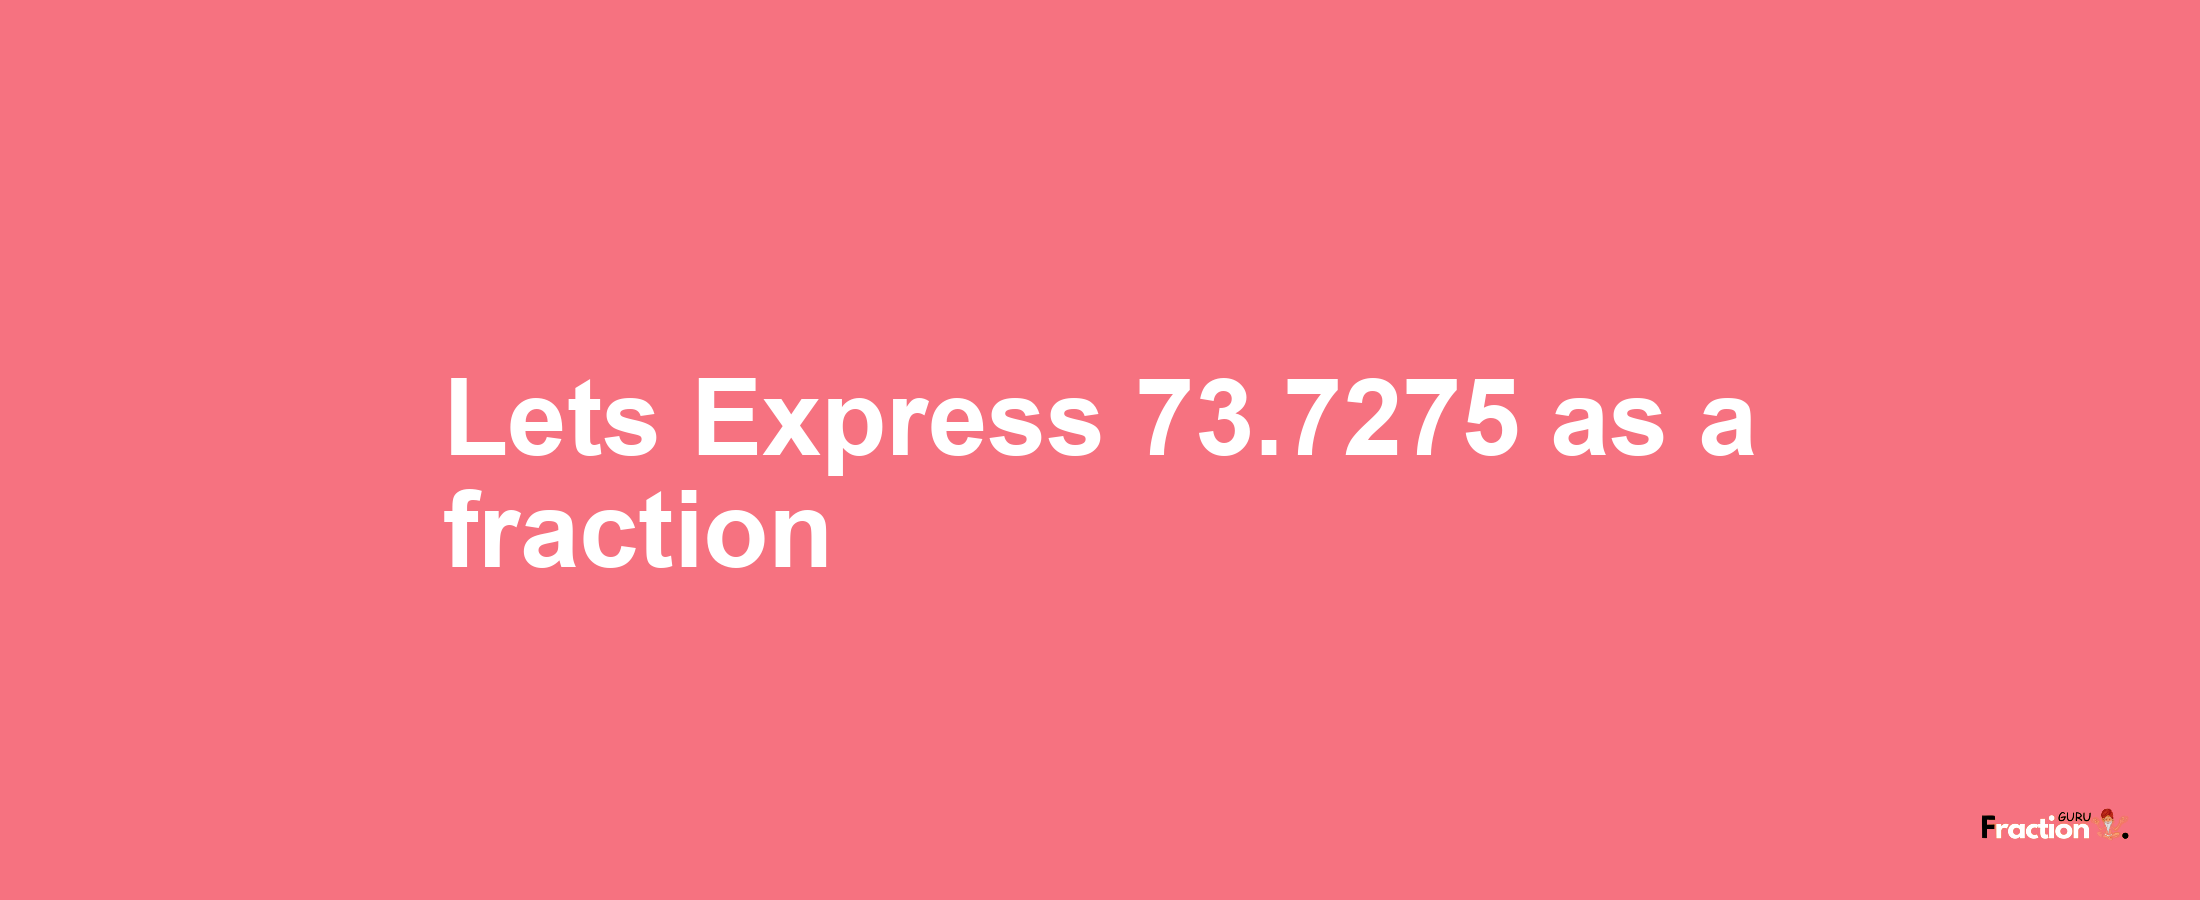 Lets Express 73.7275 as afraction